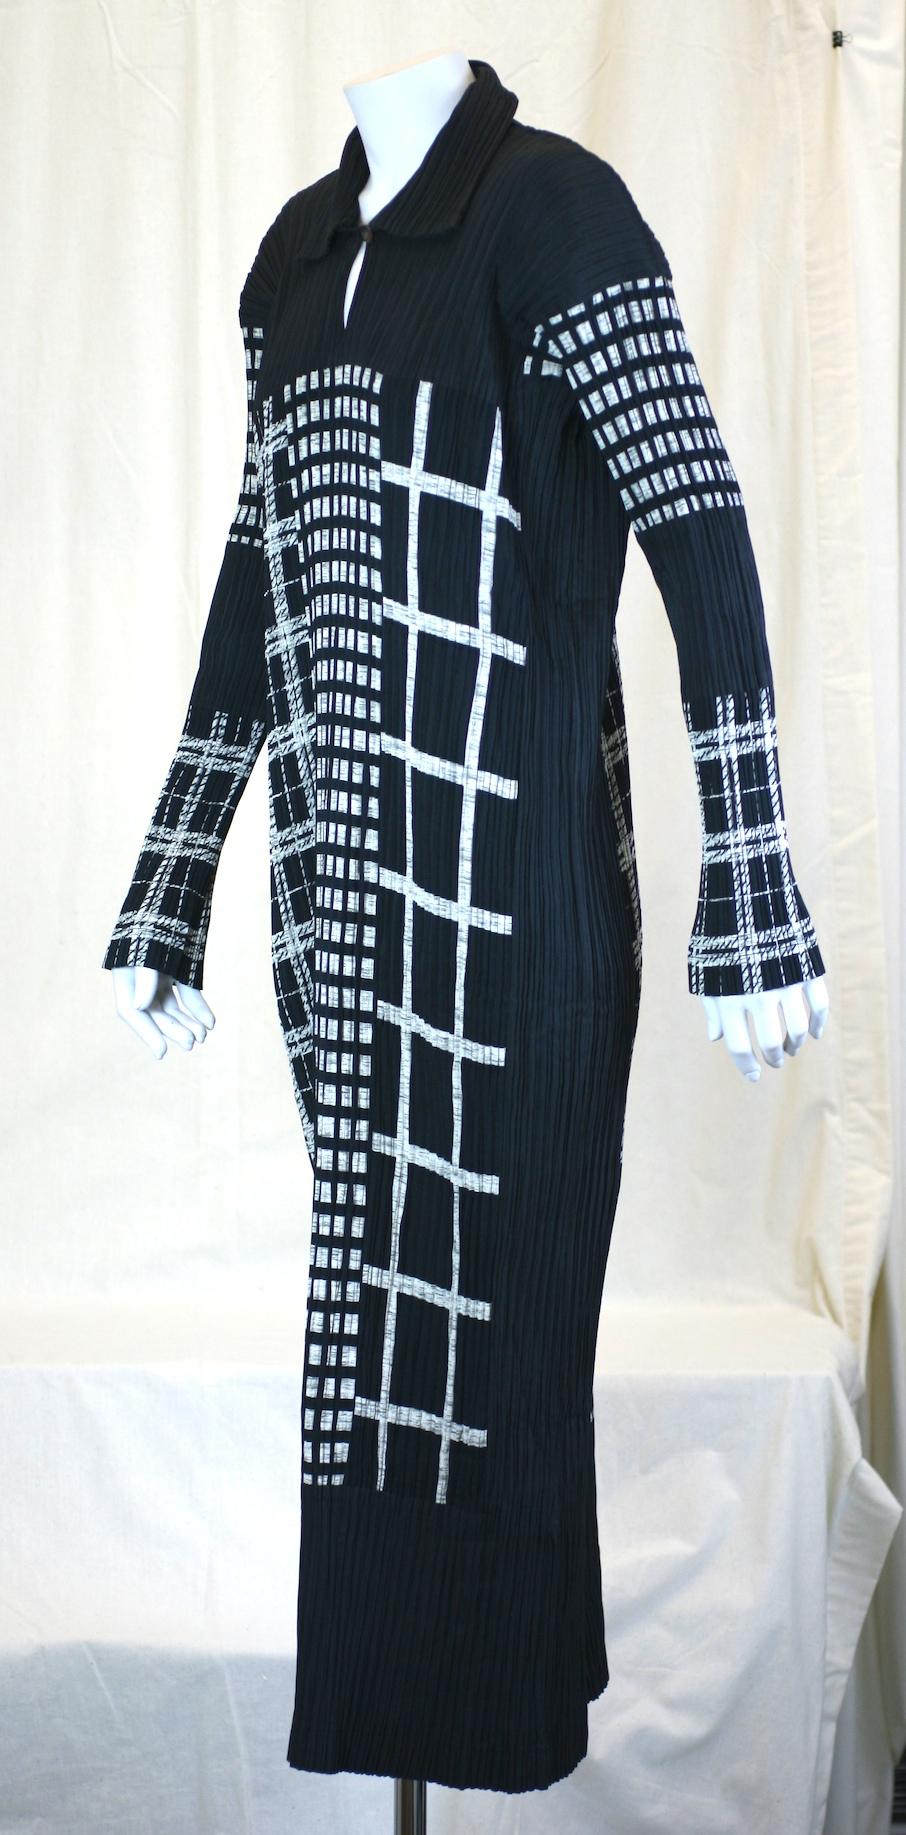 Issey Miyake Graphic Black White Pleated Dress In Excellent Condition For Sale In New York, NY